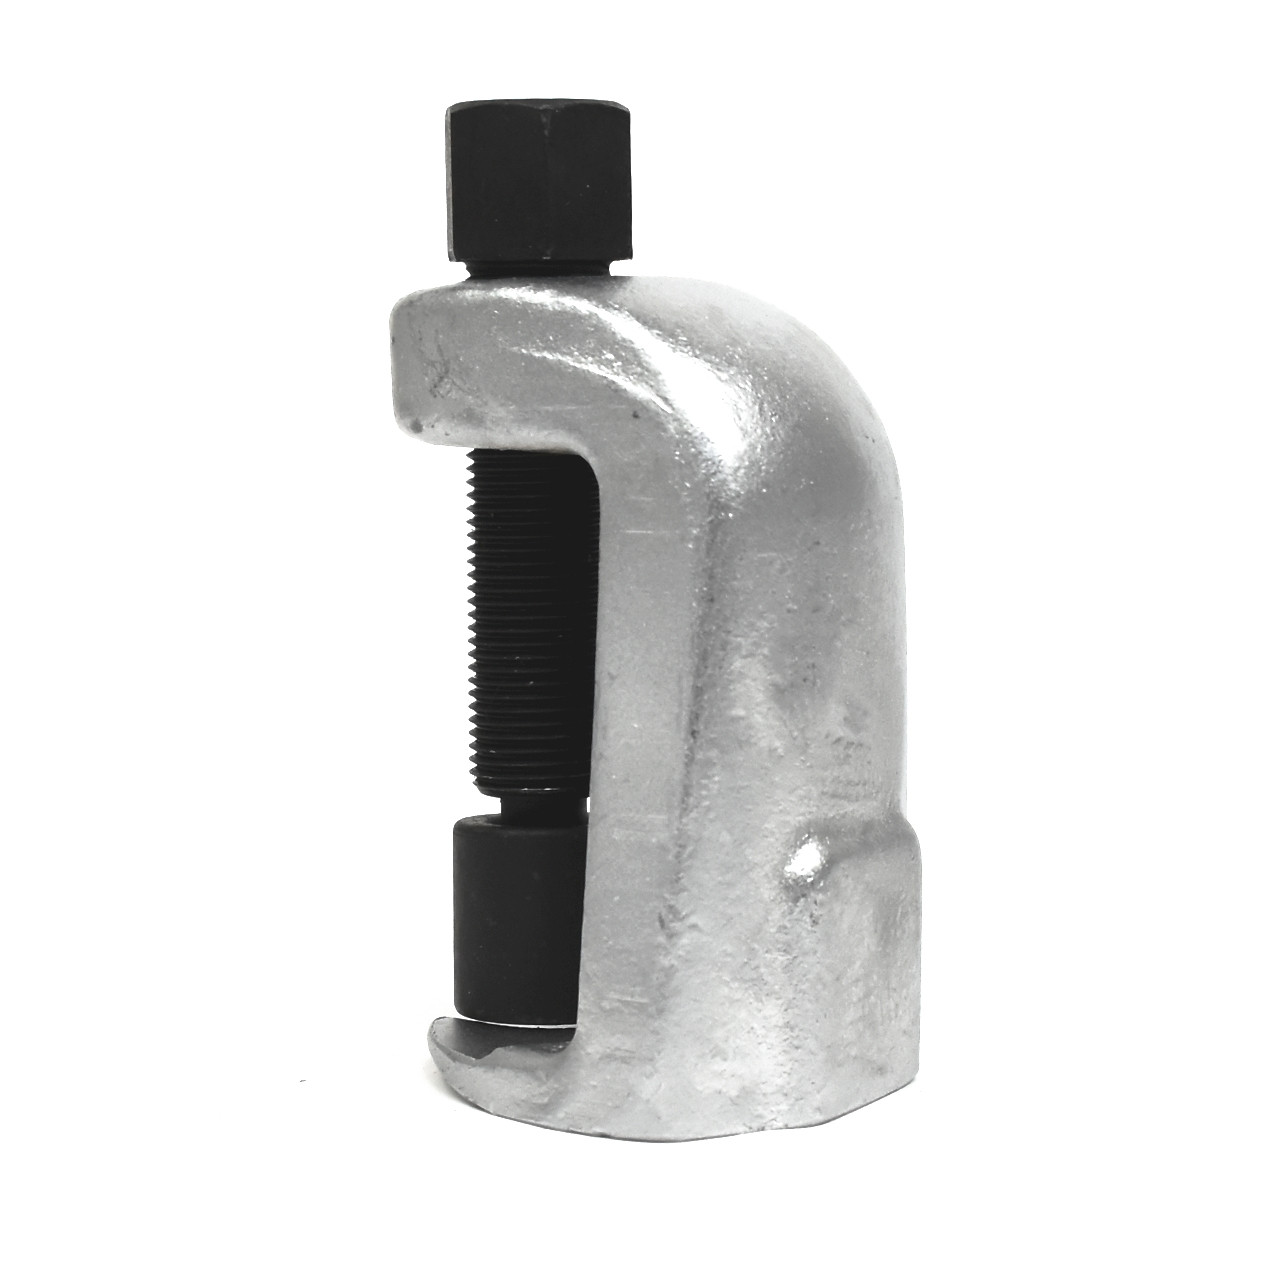 Tie Rod End Tool With Live Swivel Tip 3/4 inch (19mm) Separator [TL-TRE19]